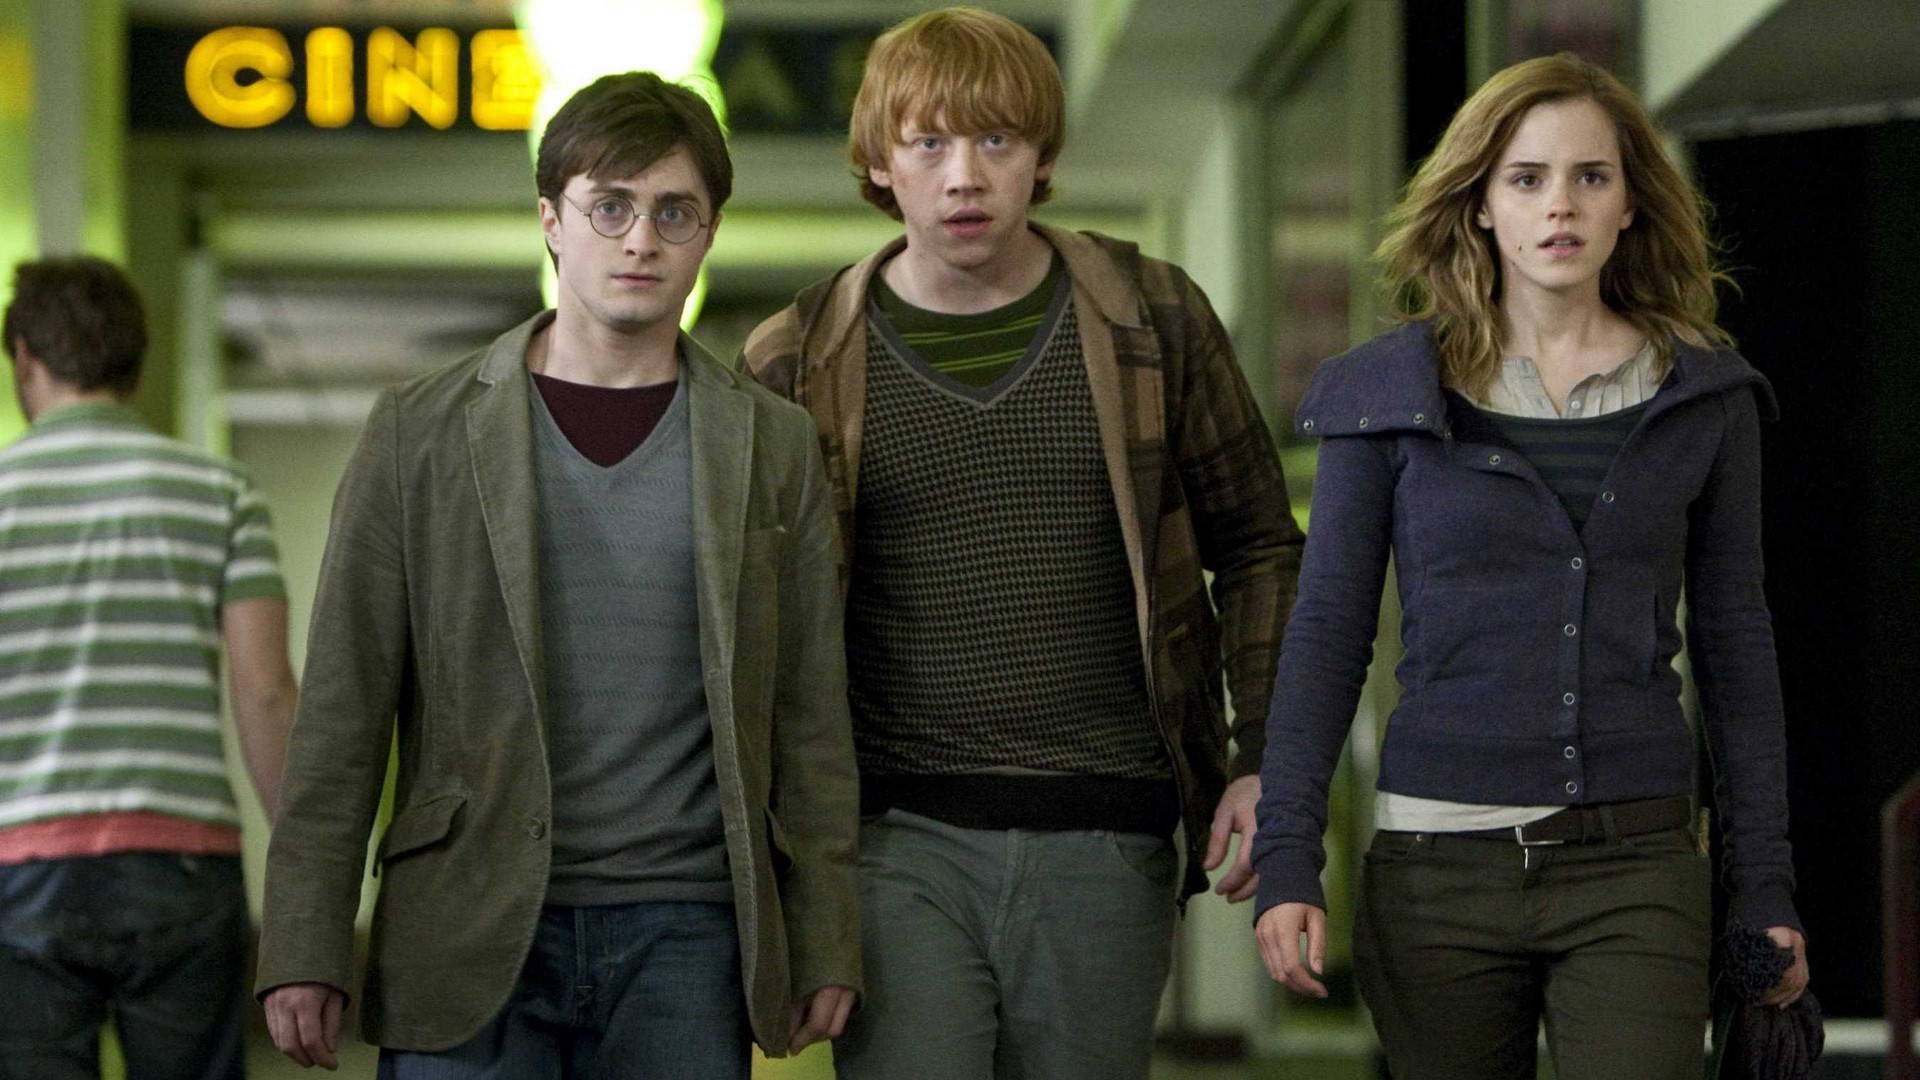 harry potter, movie, harry potter and the deathly hallows: part 1, daniel radcliffe, emma watson, hermione granger, ron weasley, rupert grint Image for desktop